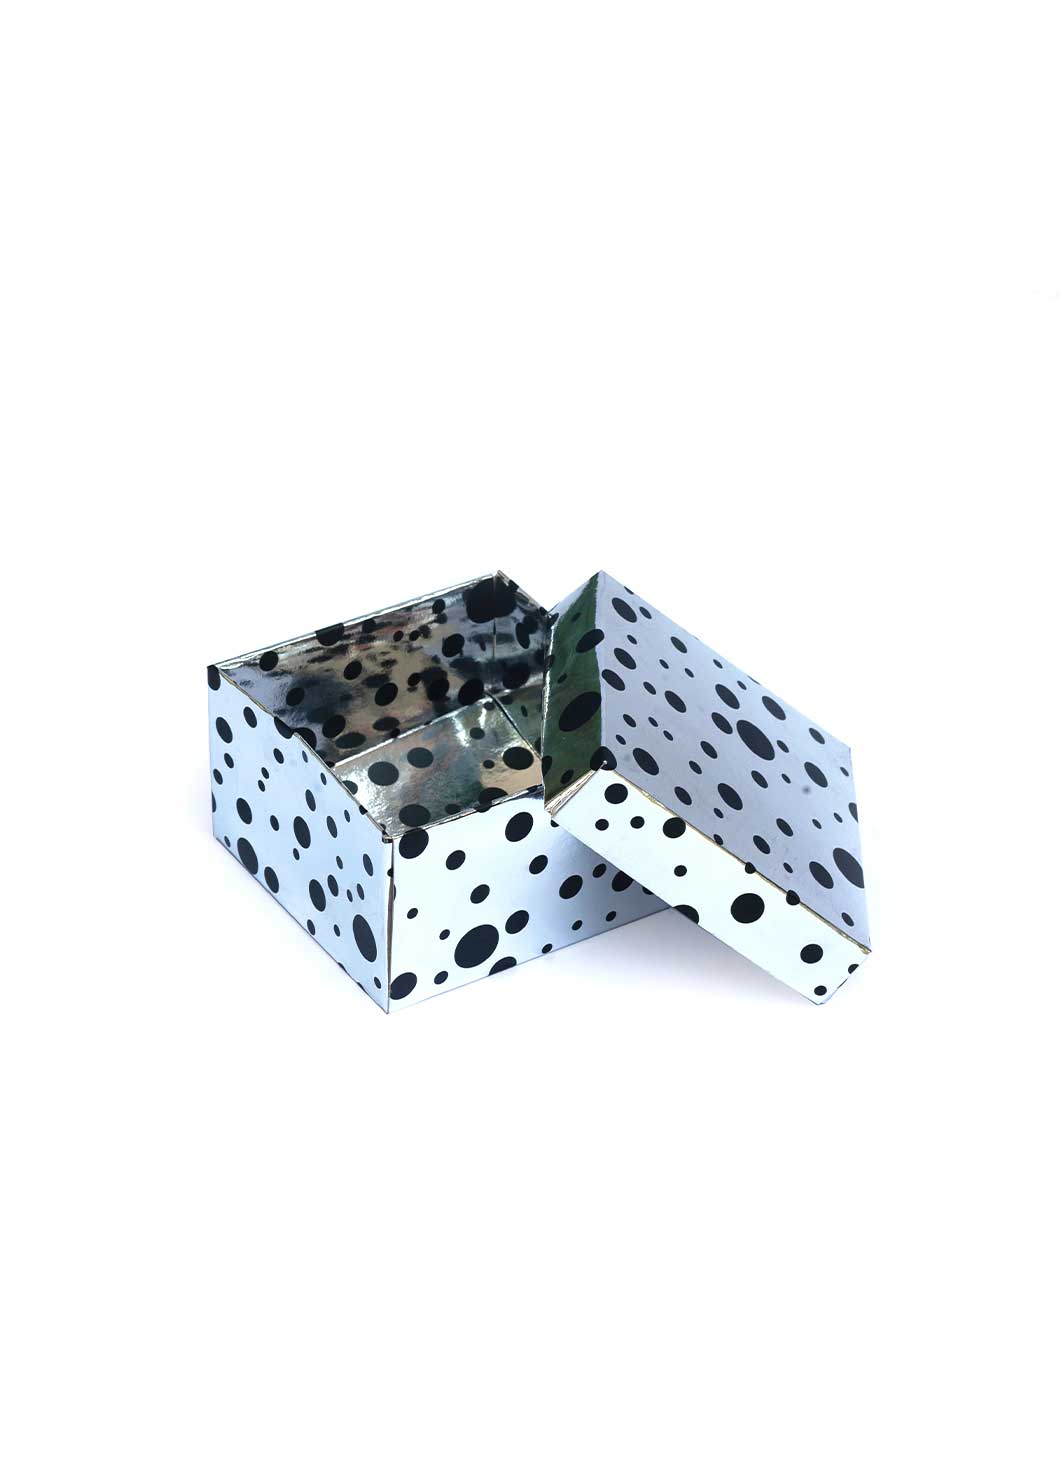 Plain Block Dotted Shine Design Box for Packing - Shiny Gift Box - Silver Gift Box